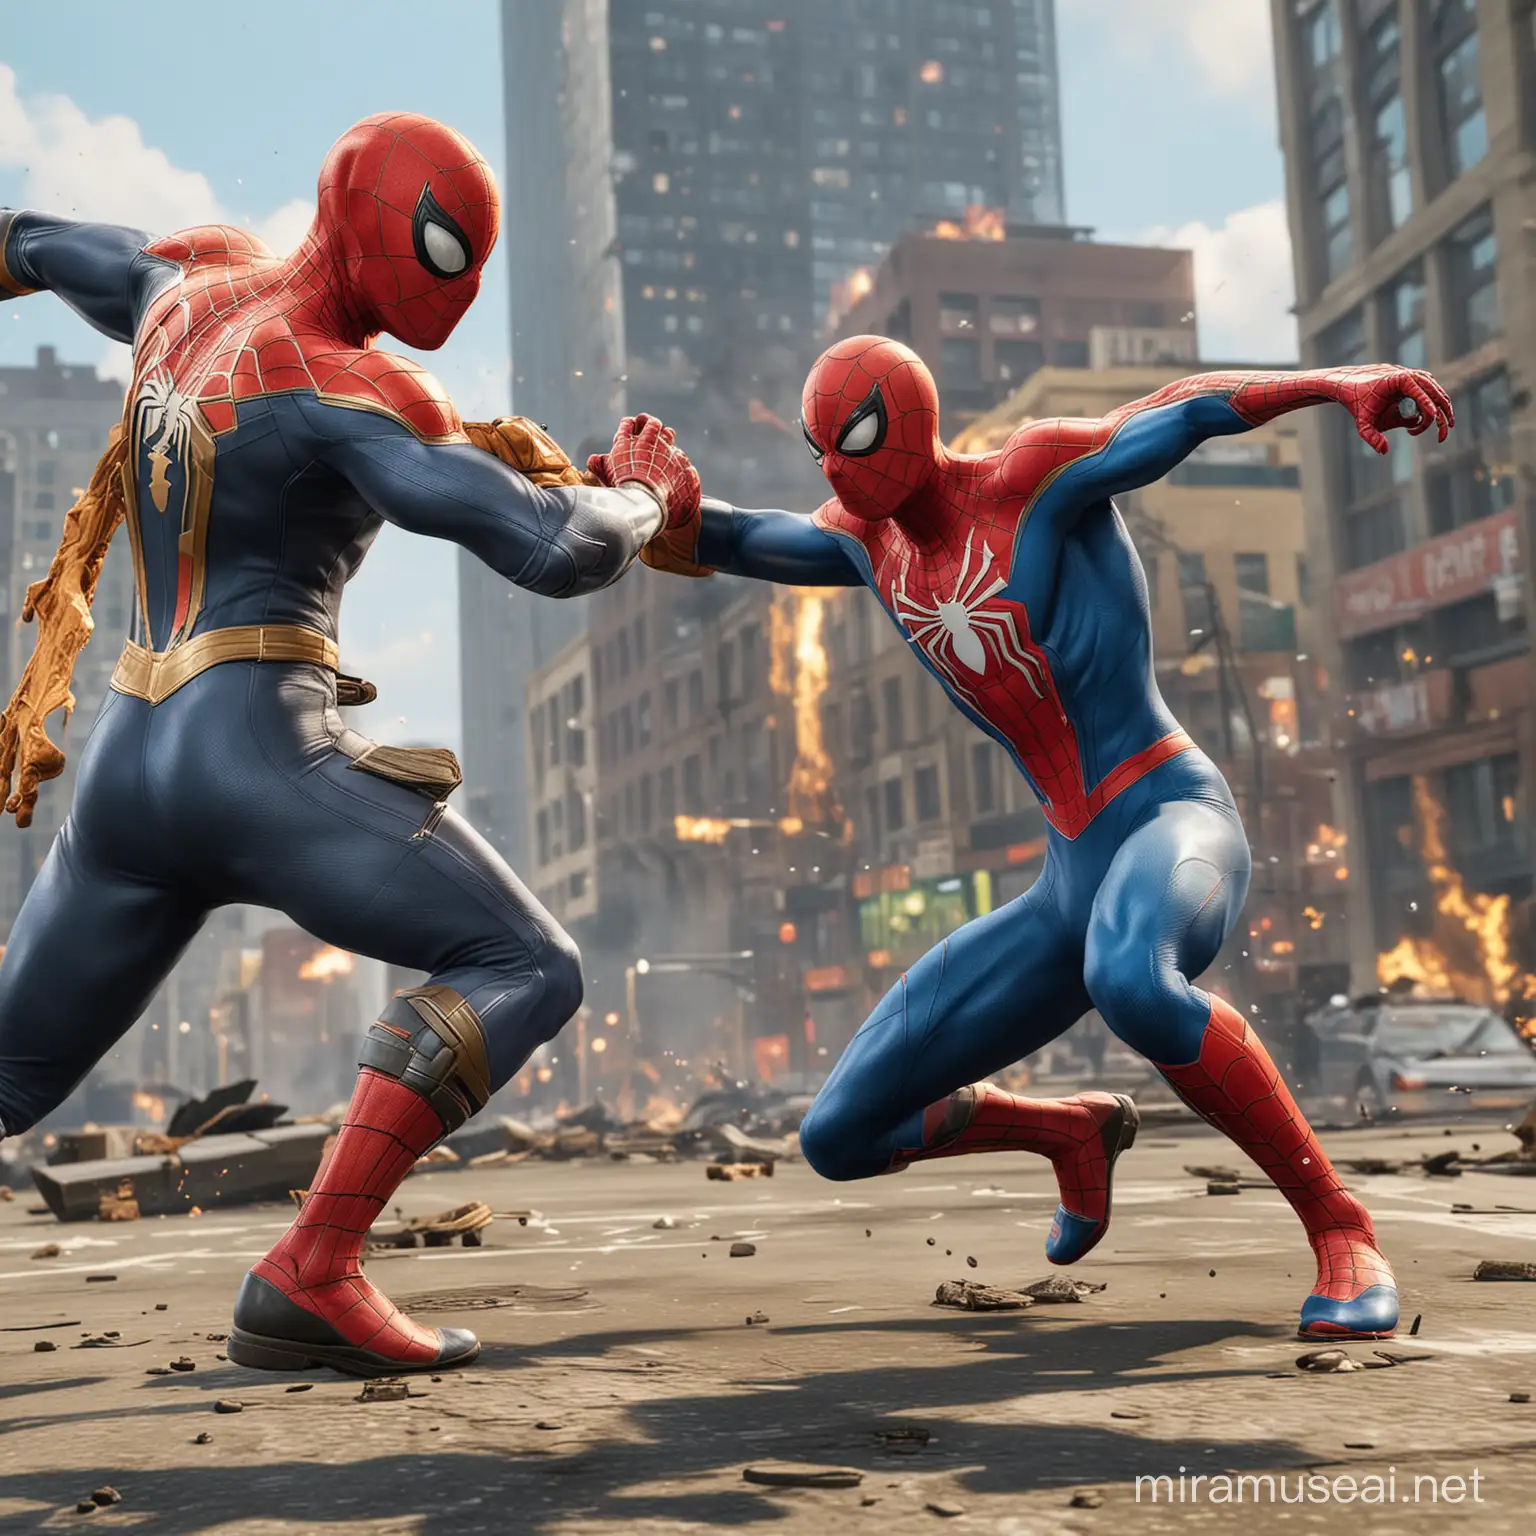 Spiderman Battles Free Fire Character in Epic Showdown